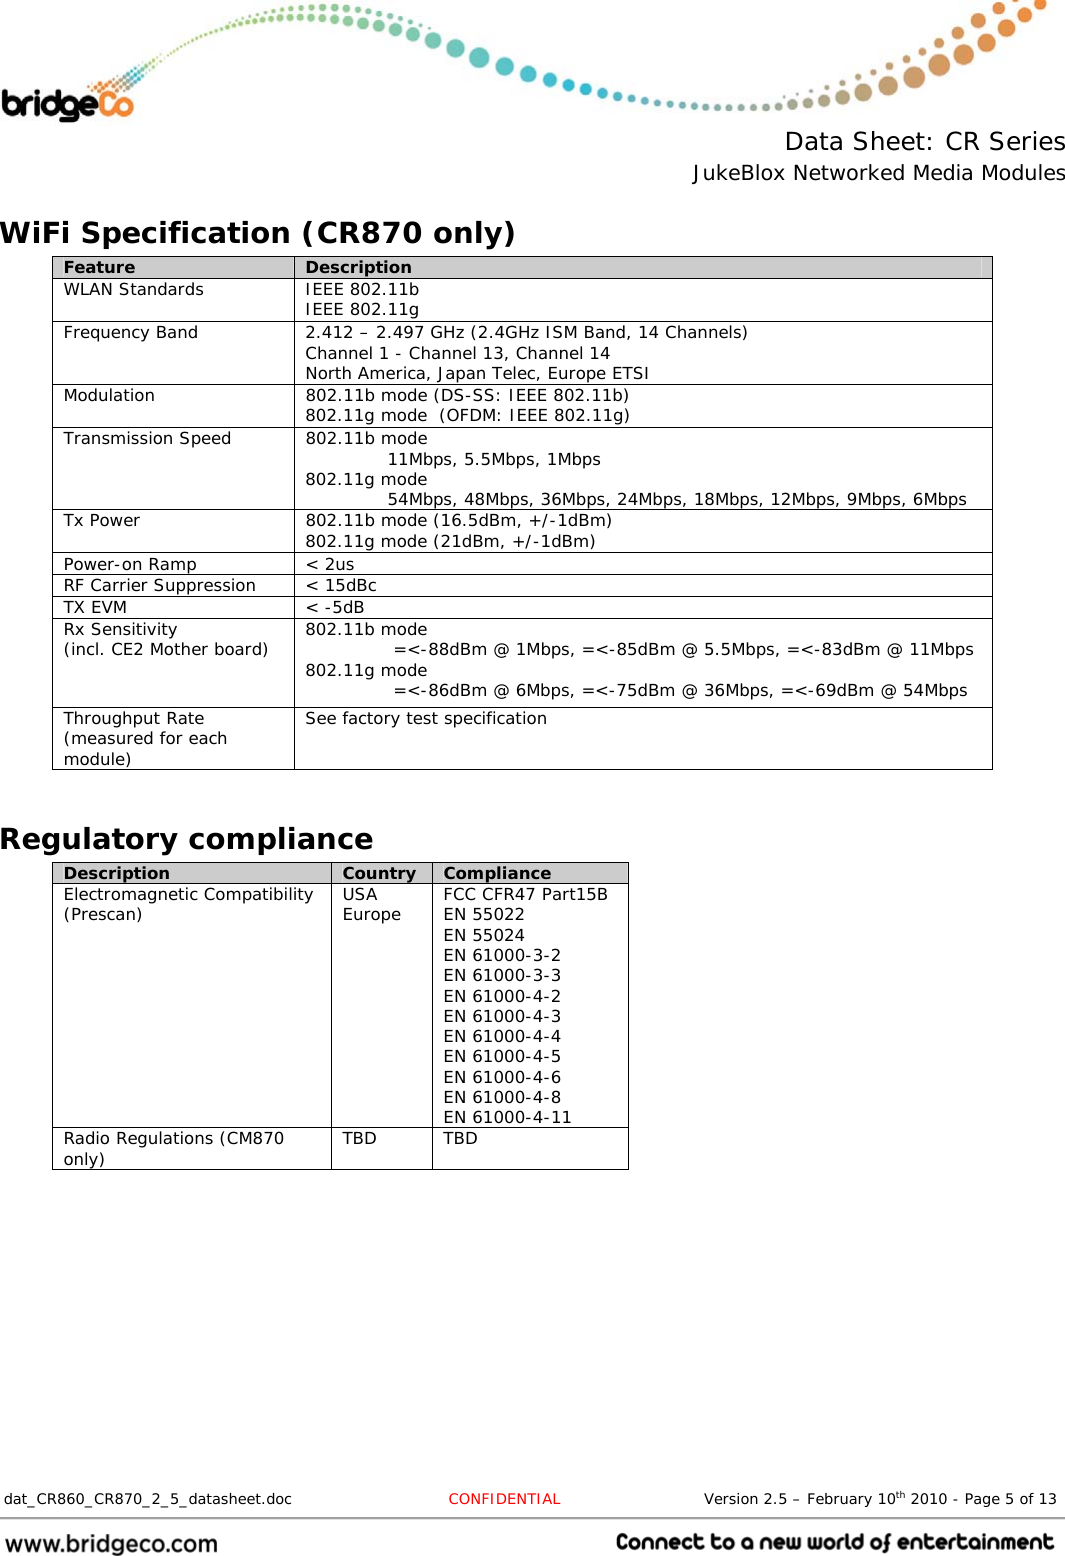  Data Sheet: CR Series JukeBlox Networked Media Modules  dat_CR860_CR870_2_5_datasheet.doc  CONFIDENTIAL                            Version 2.5 – February 10th 2010 - Page 5 of 13                                 WiFi Specification (CR870 only) Feature  Description WLAN Standards  IEEE 802.11b IEEE 802.11g Frequency Band  2.412 – 2.497 GHz (2.4GHz ISM Band, 14 Channels) Channel 1 - Channel 13, Channel 14 North America, Japan Telec, Europe ETSI Modulation  802.11b mode (DS-SS: IEEE 802.11b) 802.11g mode  (OFDM: IEEE 802.11g) Transmission Speed  802.11b mode               11Mbps, 5.5Mbps, 1Mbps 802.11g mode               54Mbps, 48Mbps, 36Mbps, 24Mbps, 18Mbps, 12Mbps, 9Mbps, 6Mbps Tx Power  802.11b mode (16.5dBm, +/-1dBm) 802.11g mode (21dBm, +/-1dBm) Power-on Ramp  &lt; 2us RF Carrier Suppression  &lt; 15dBc TX EVM  &lt; -5dB Rx Sensitivity  (incl. CE2 Mother board)  802.11b mode                =&lt;-88dBm @ 1Mbps, =&lt;-85dBm @ 5.5Mbps, =&lt;-83dBm @ 11Mbps 802.11g mode                =&lt;-86dBm @ 6Mbps, =&lt;-75dBm @ 36Mbps, =&lt;-69dBm @ 54Mbps Throughput Rate (measured for each module) See factory test specification  Regulatory compliance Description  Country  Compliance Electromagnetic Compatibility (Prescan)  USA Europe  FCC CFR47 Part15B EN 55022 EN 55024 EN 61000-3-2 EN 61000-3-3 EN 61000-4-2 EN 61000-4-3 EN 61000-4-4 EN 61000-4-5 EN 61000-4-6 EN 61000-4-8 EN 61000-4-11 Radio Regulations (CM870 only)  TBD TBD  